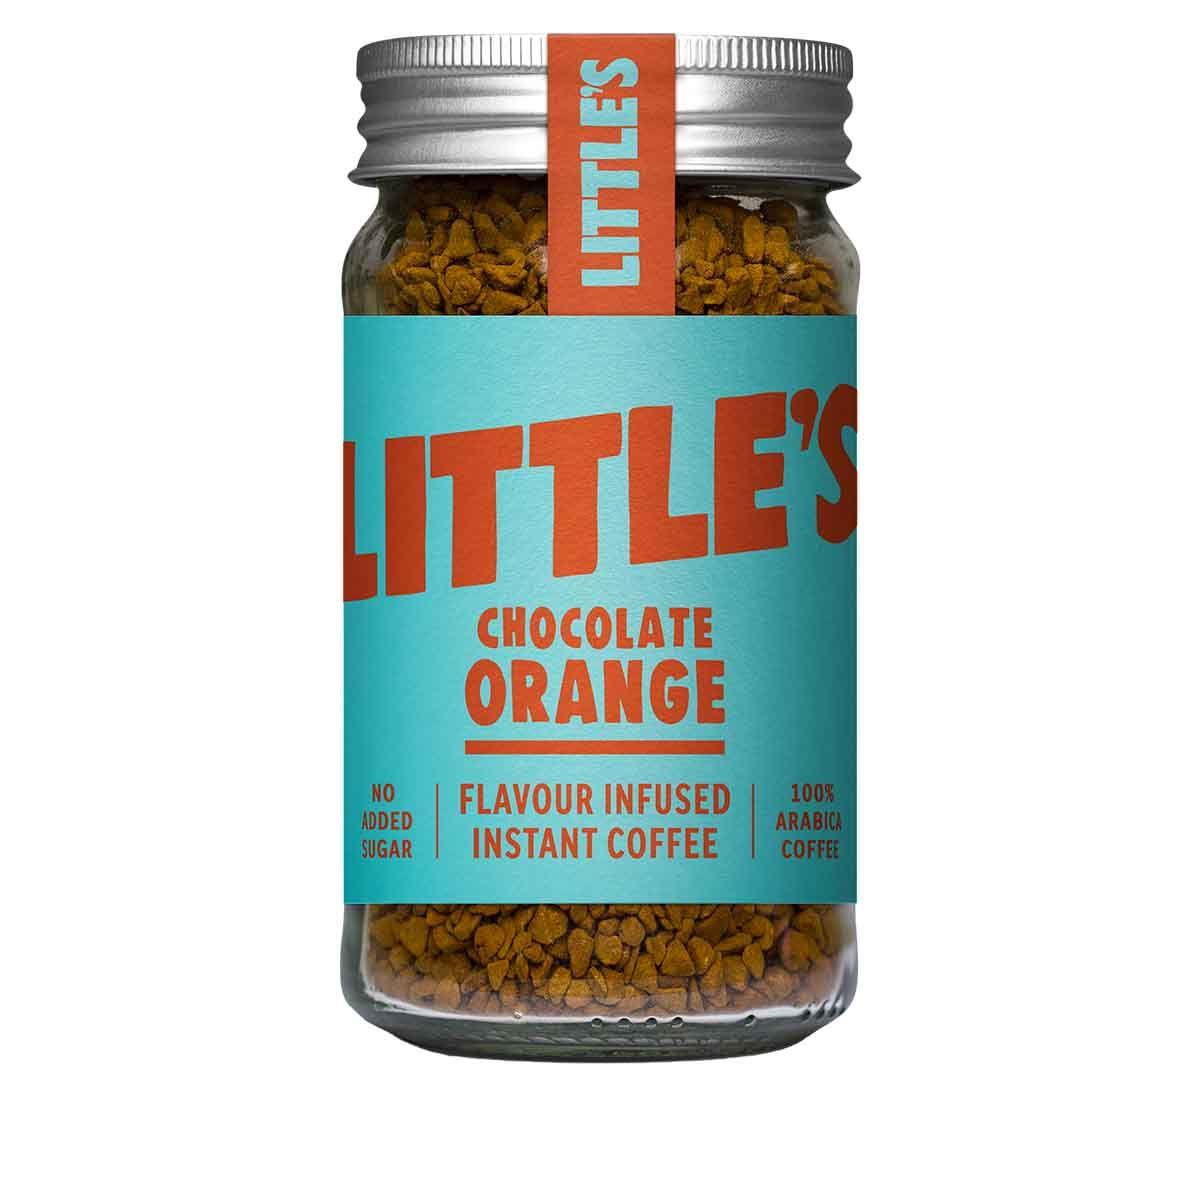 Littles - Flavoured Instant Coffee Chocolate Orange - 50g - Vending Superstore